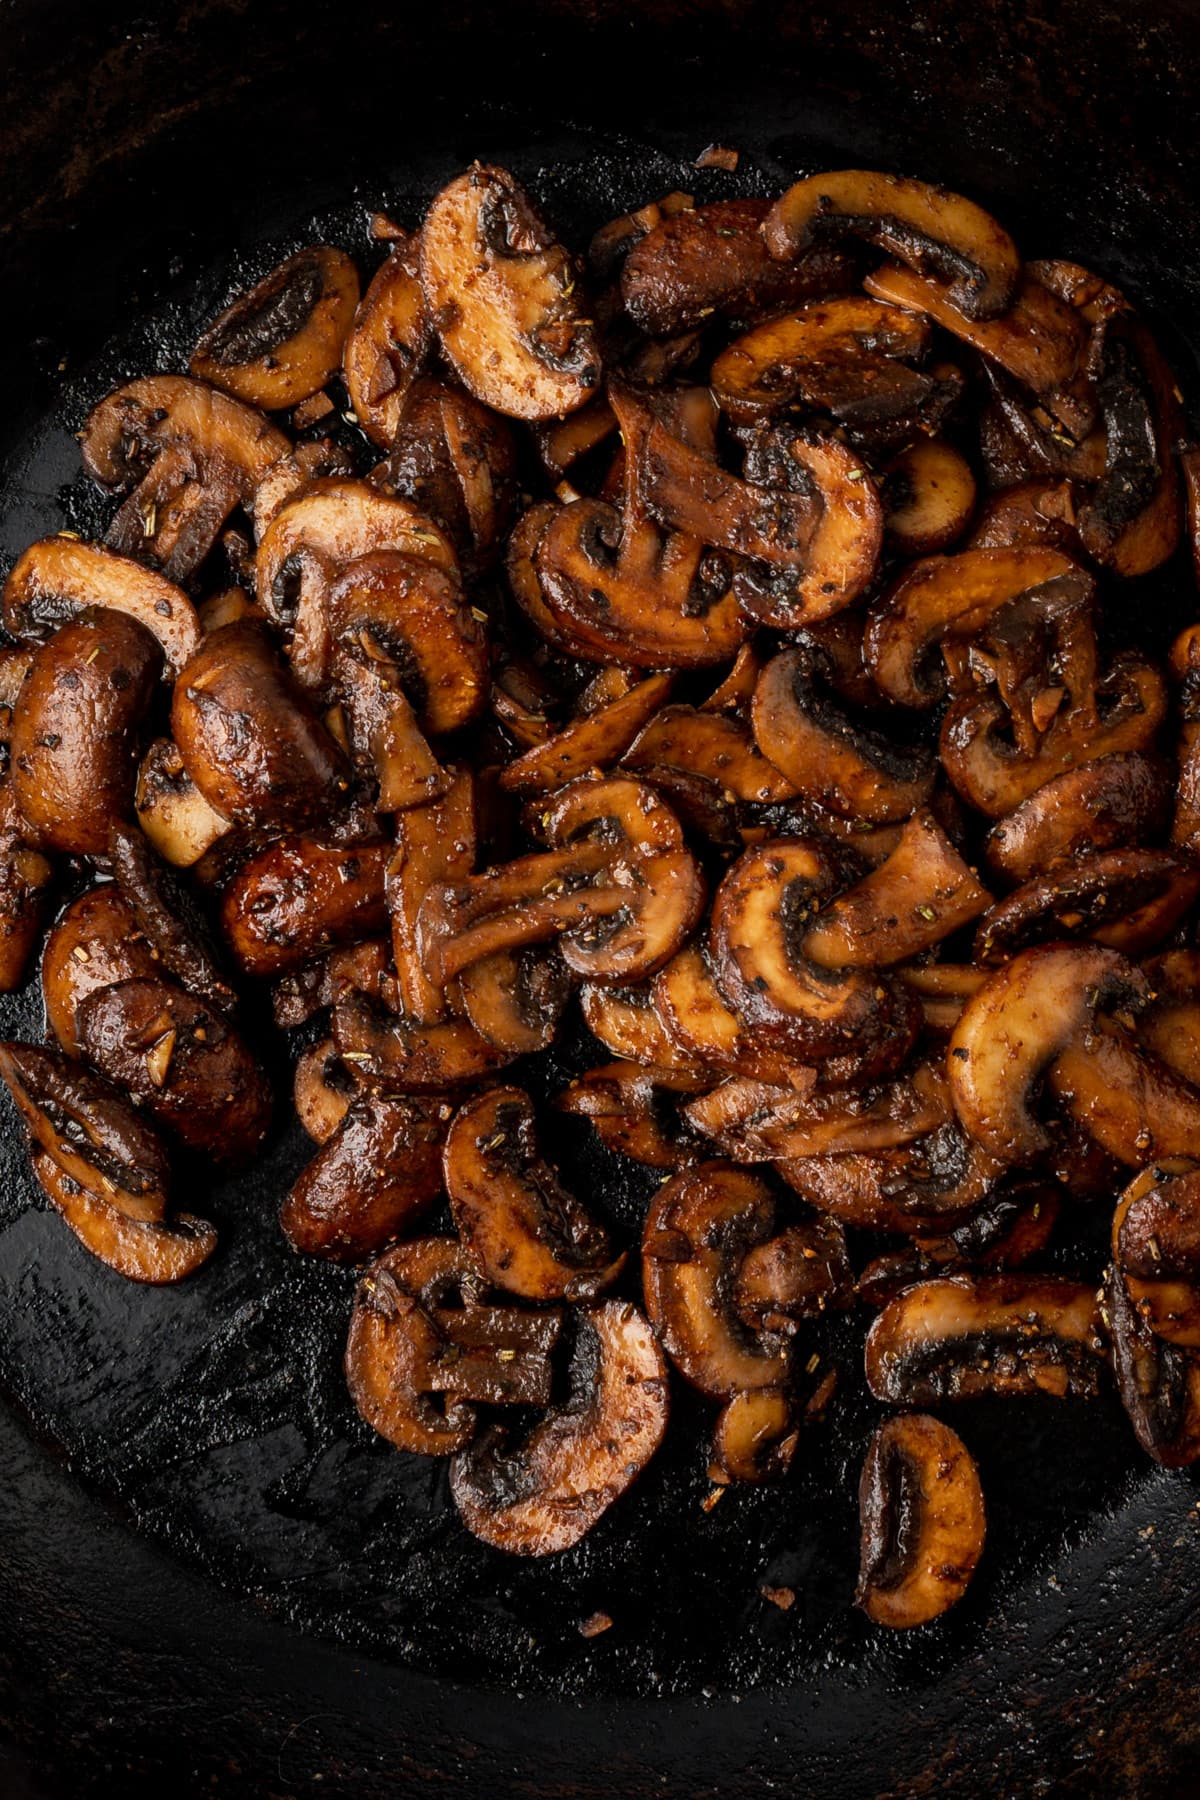 Dark, shiny sauteed sliced mushrooms coated in herbs and spices.